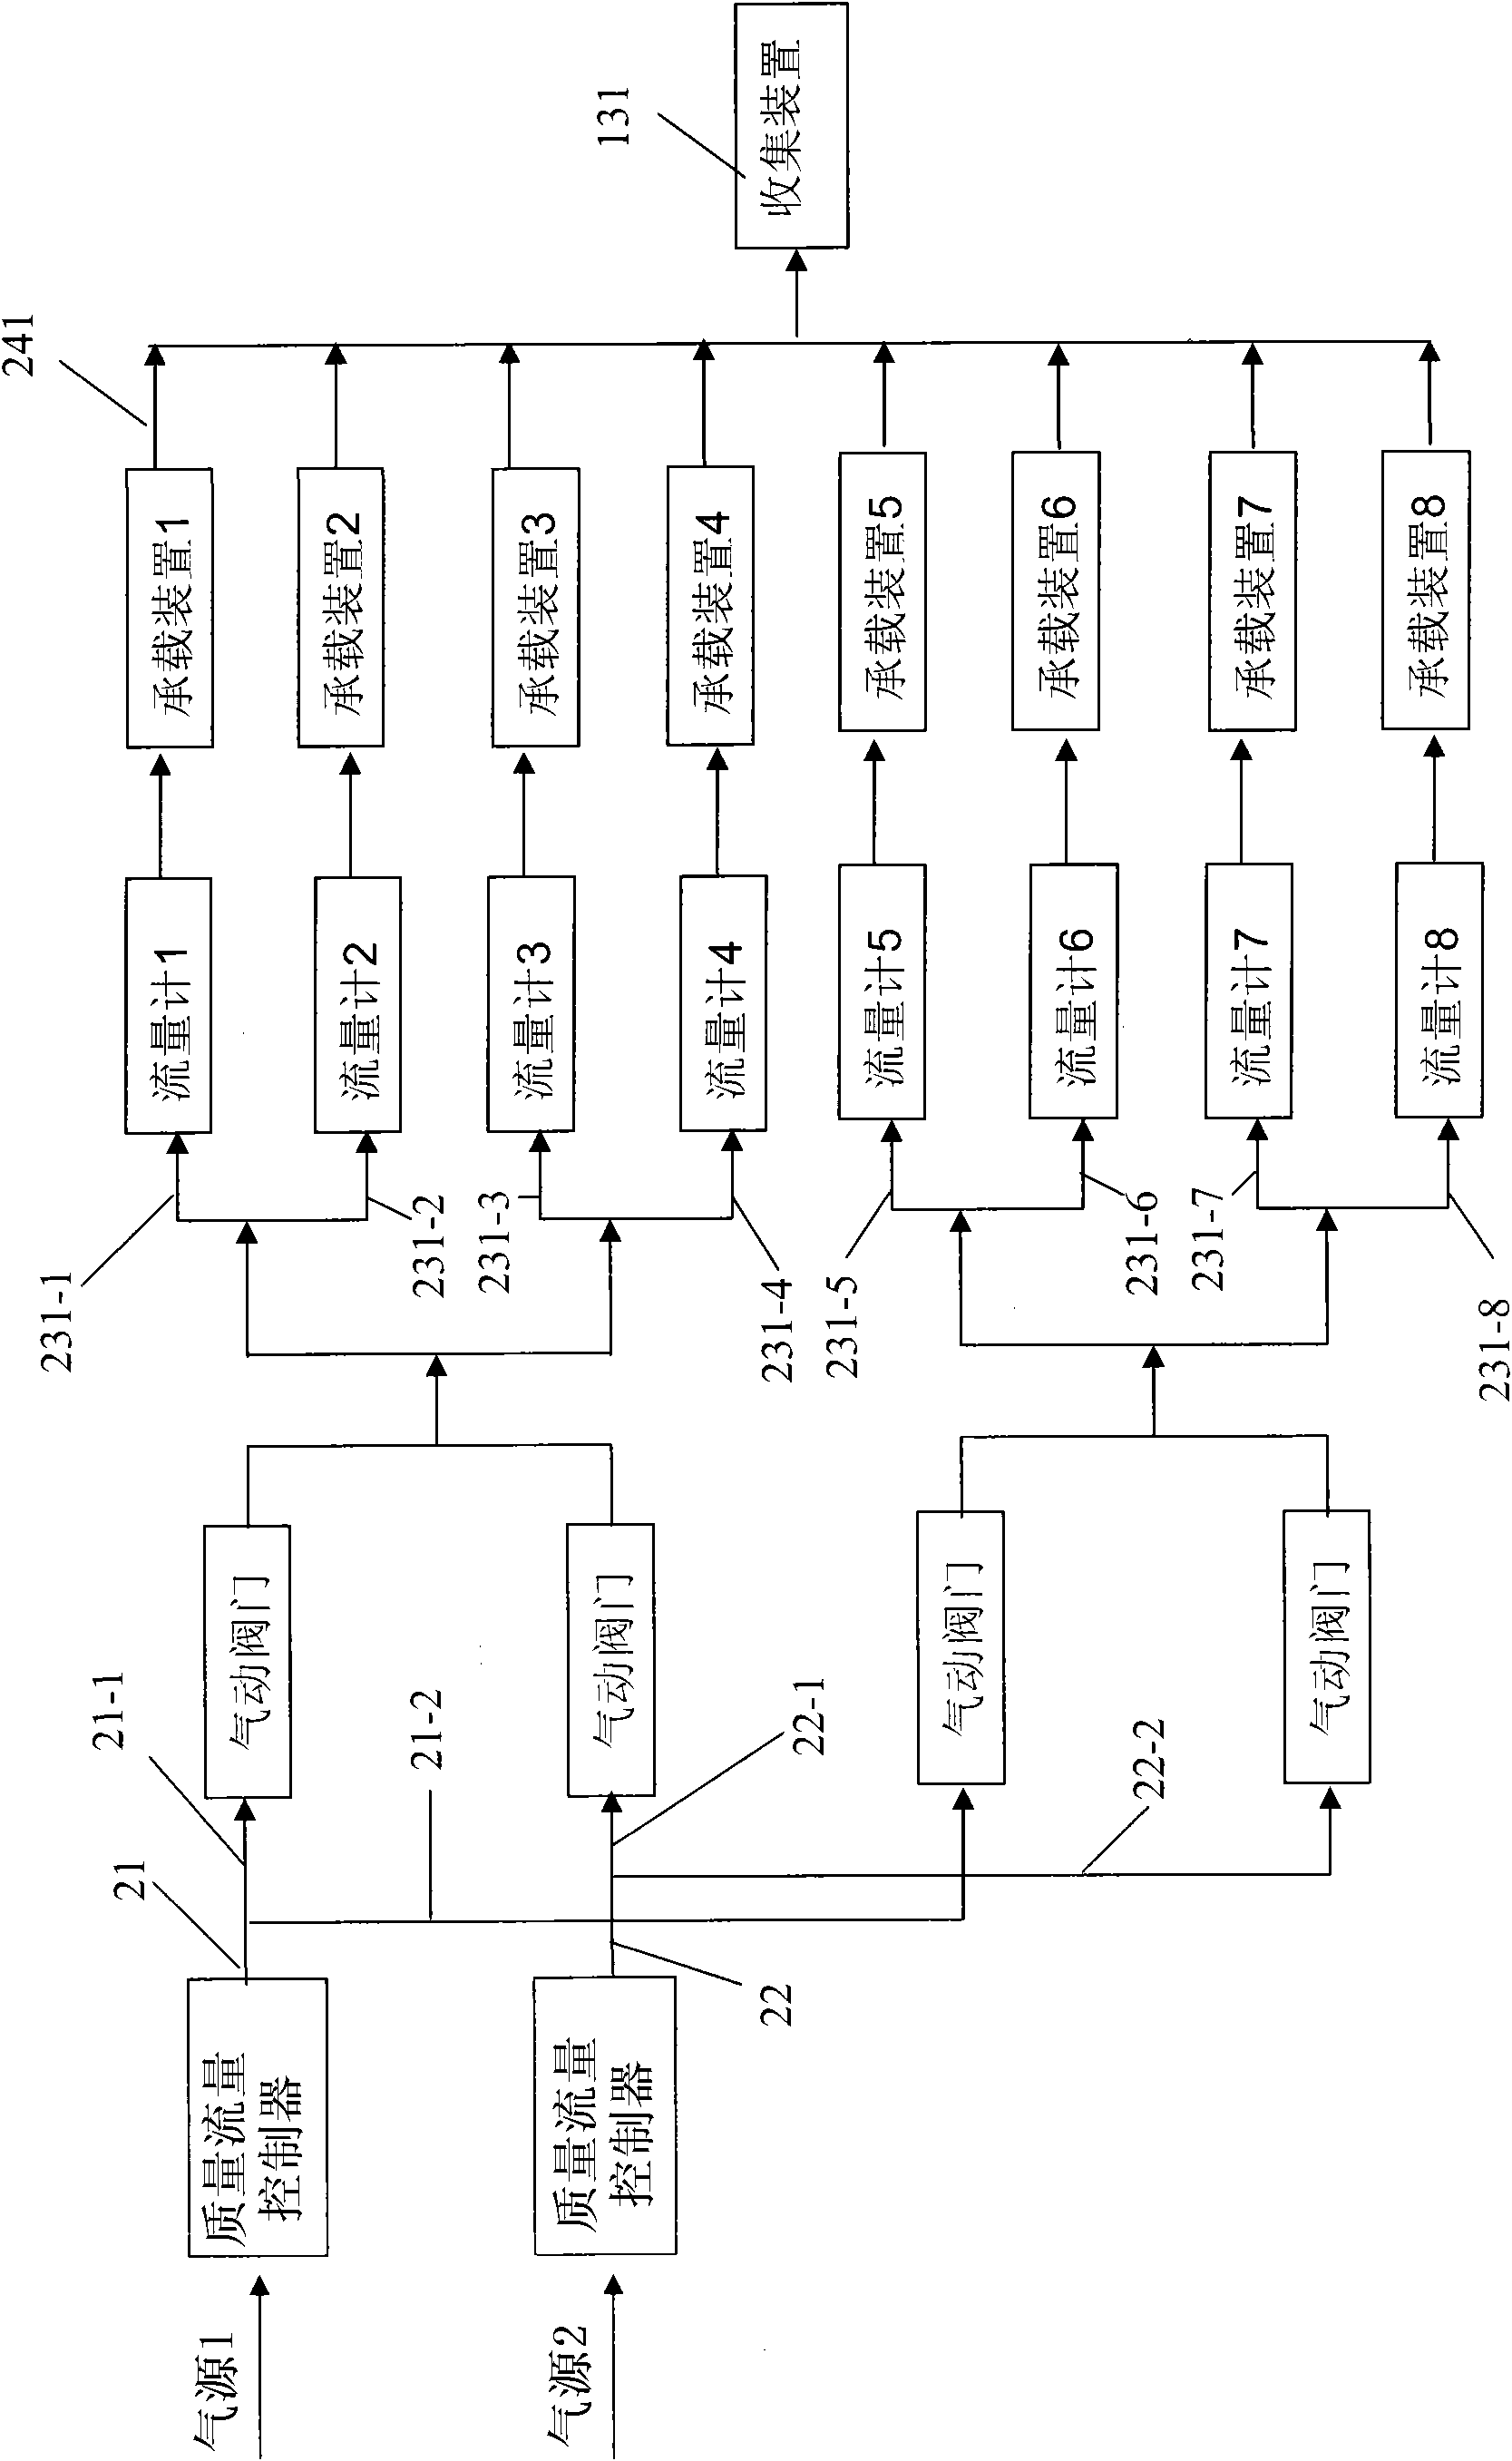 Method and system for treating high-flux catalysts